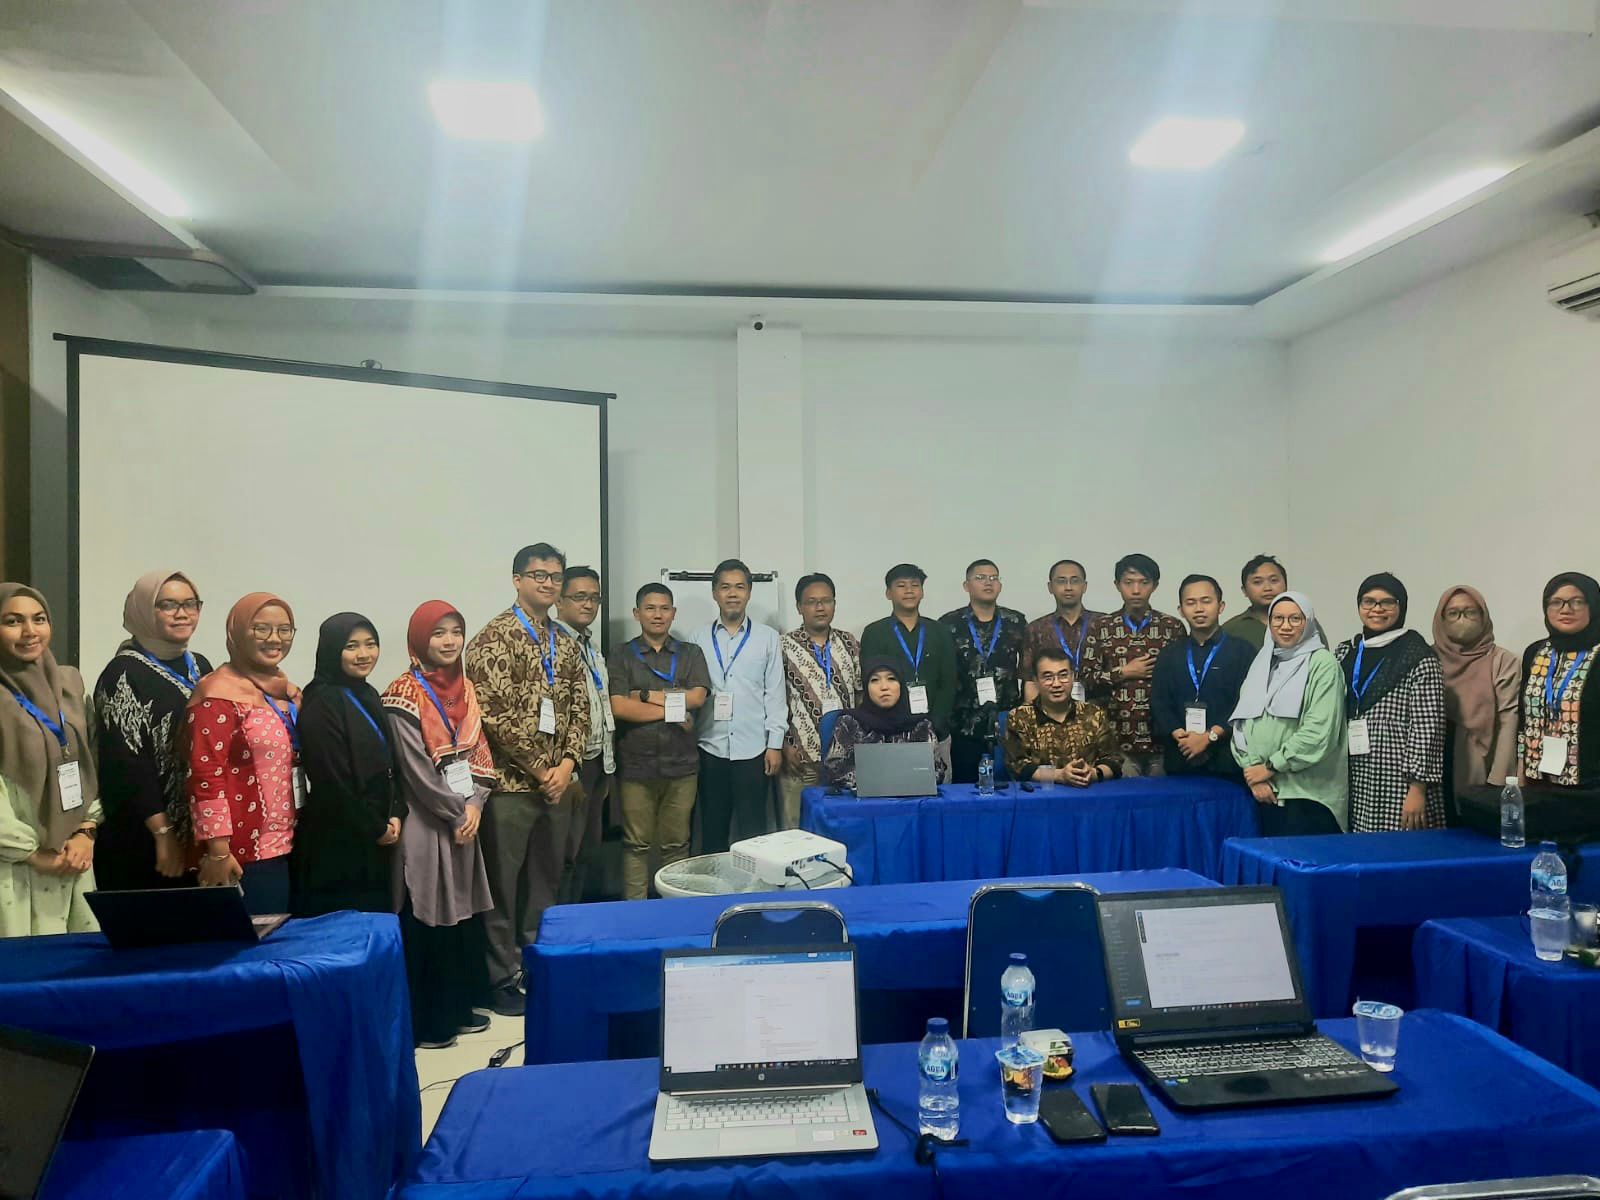 Day 1 Kegiatan 18th IRSA Pre-conference Workshop 2023 “Academic Writing and Publication in Regional Sciences”